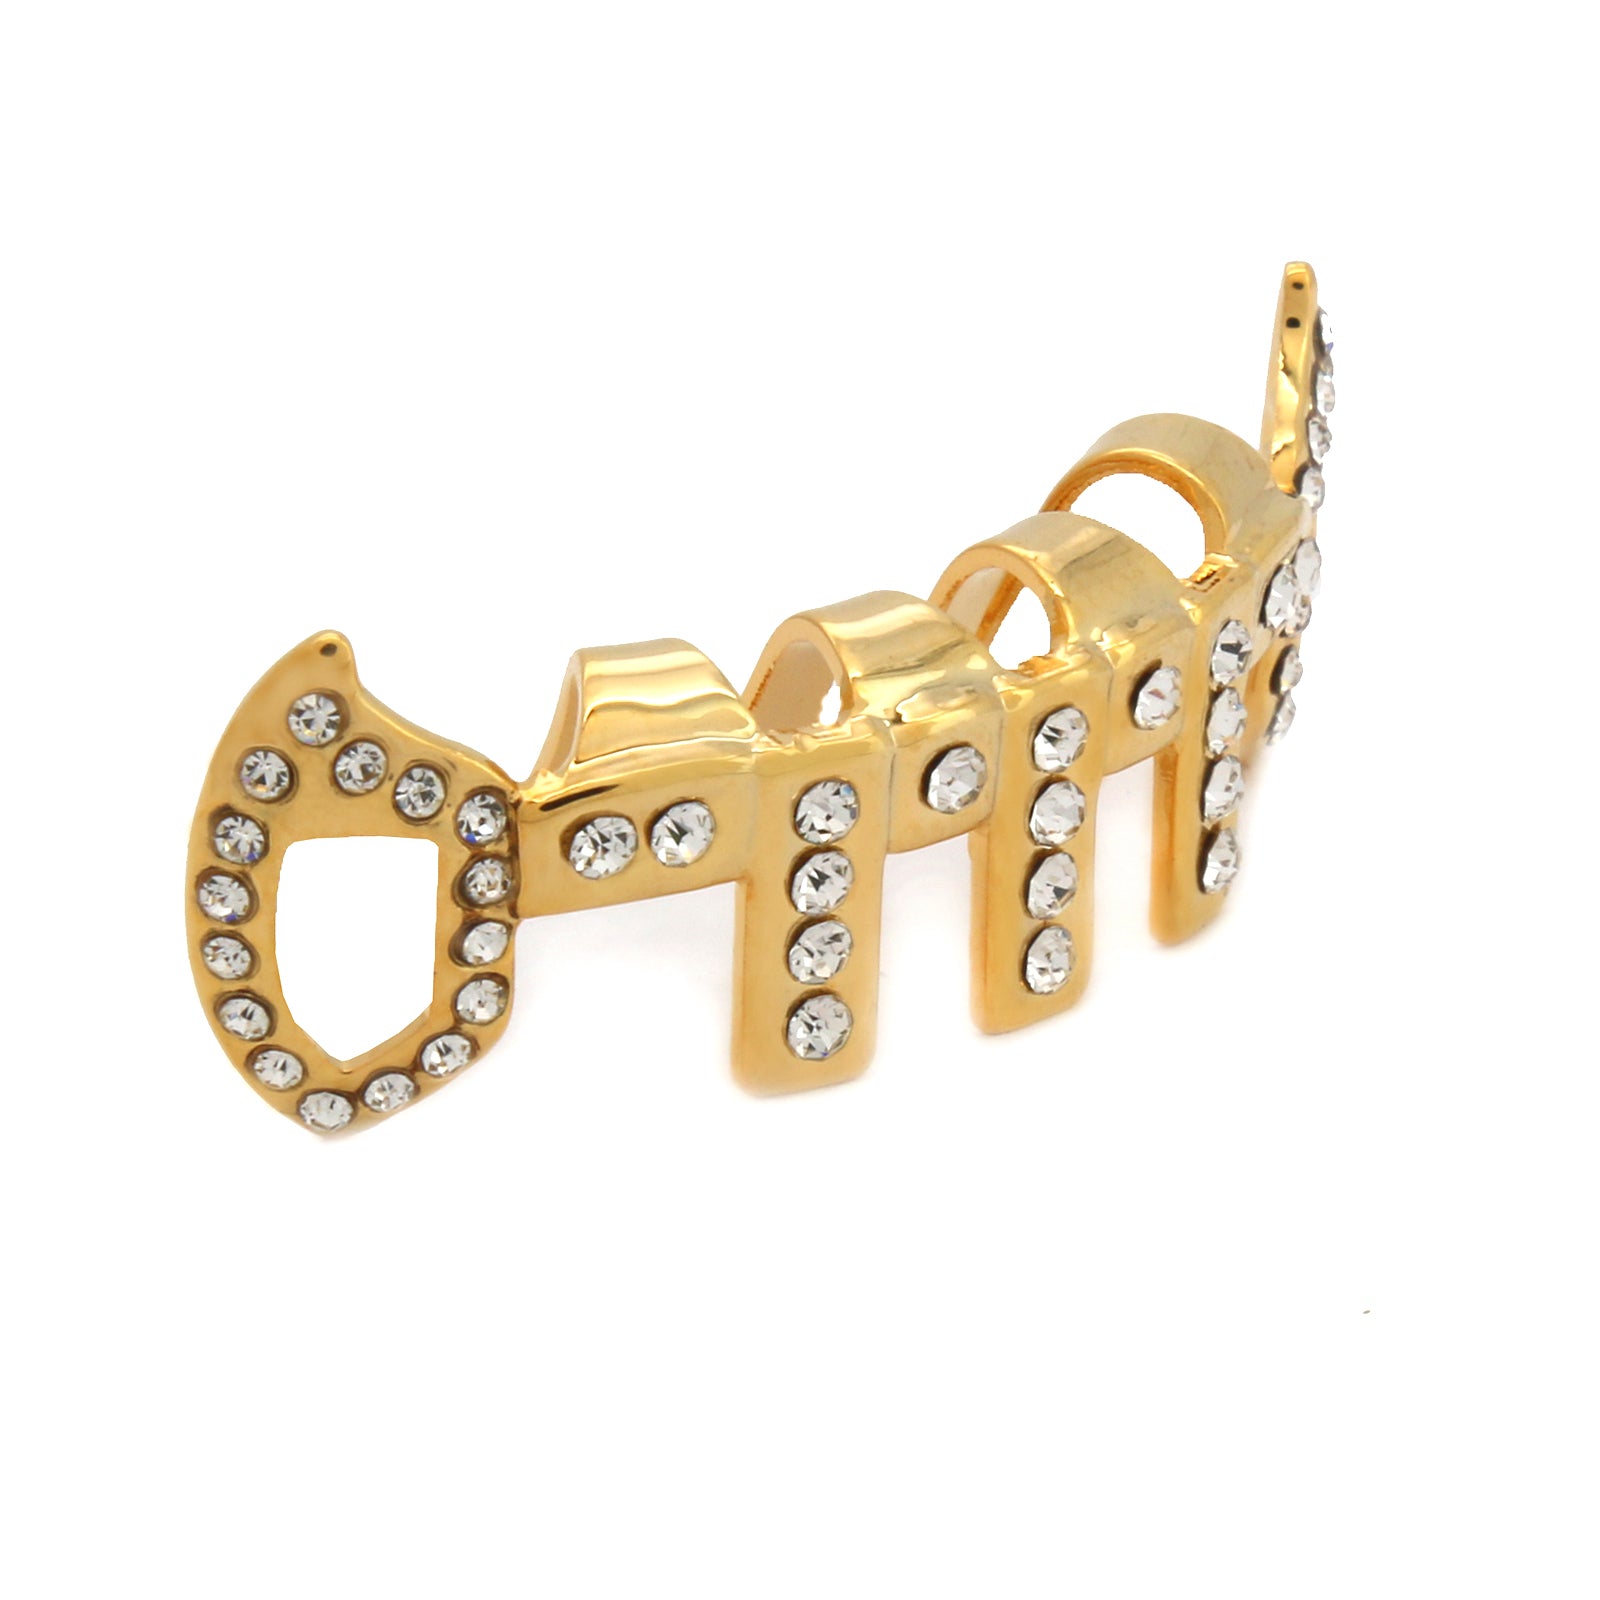 GOLD BOTTOM GRILLZ VERTICAL BARS ICE OUT FANG